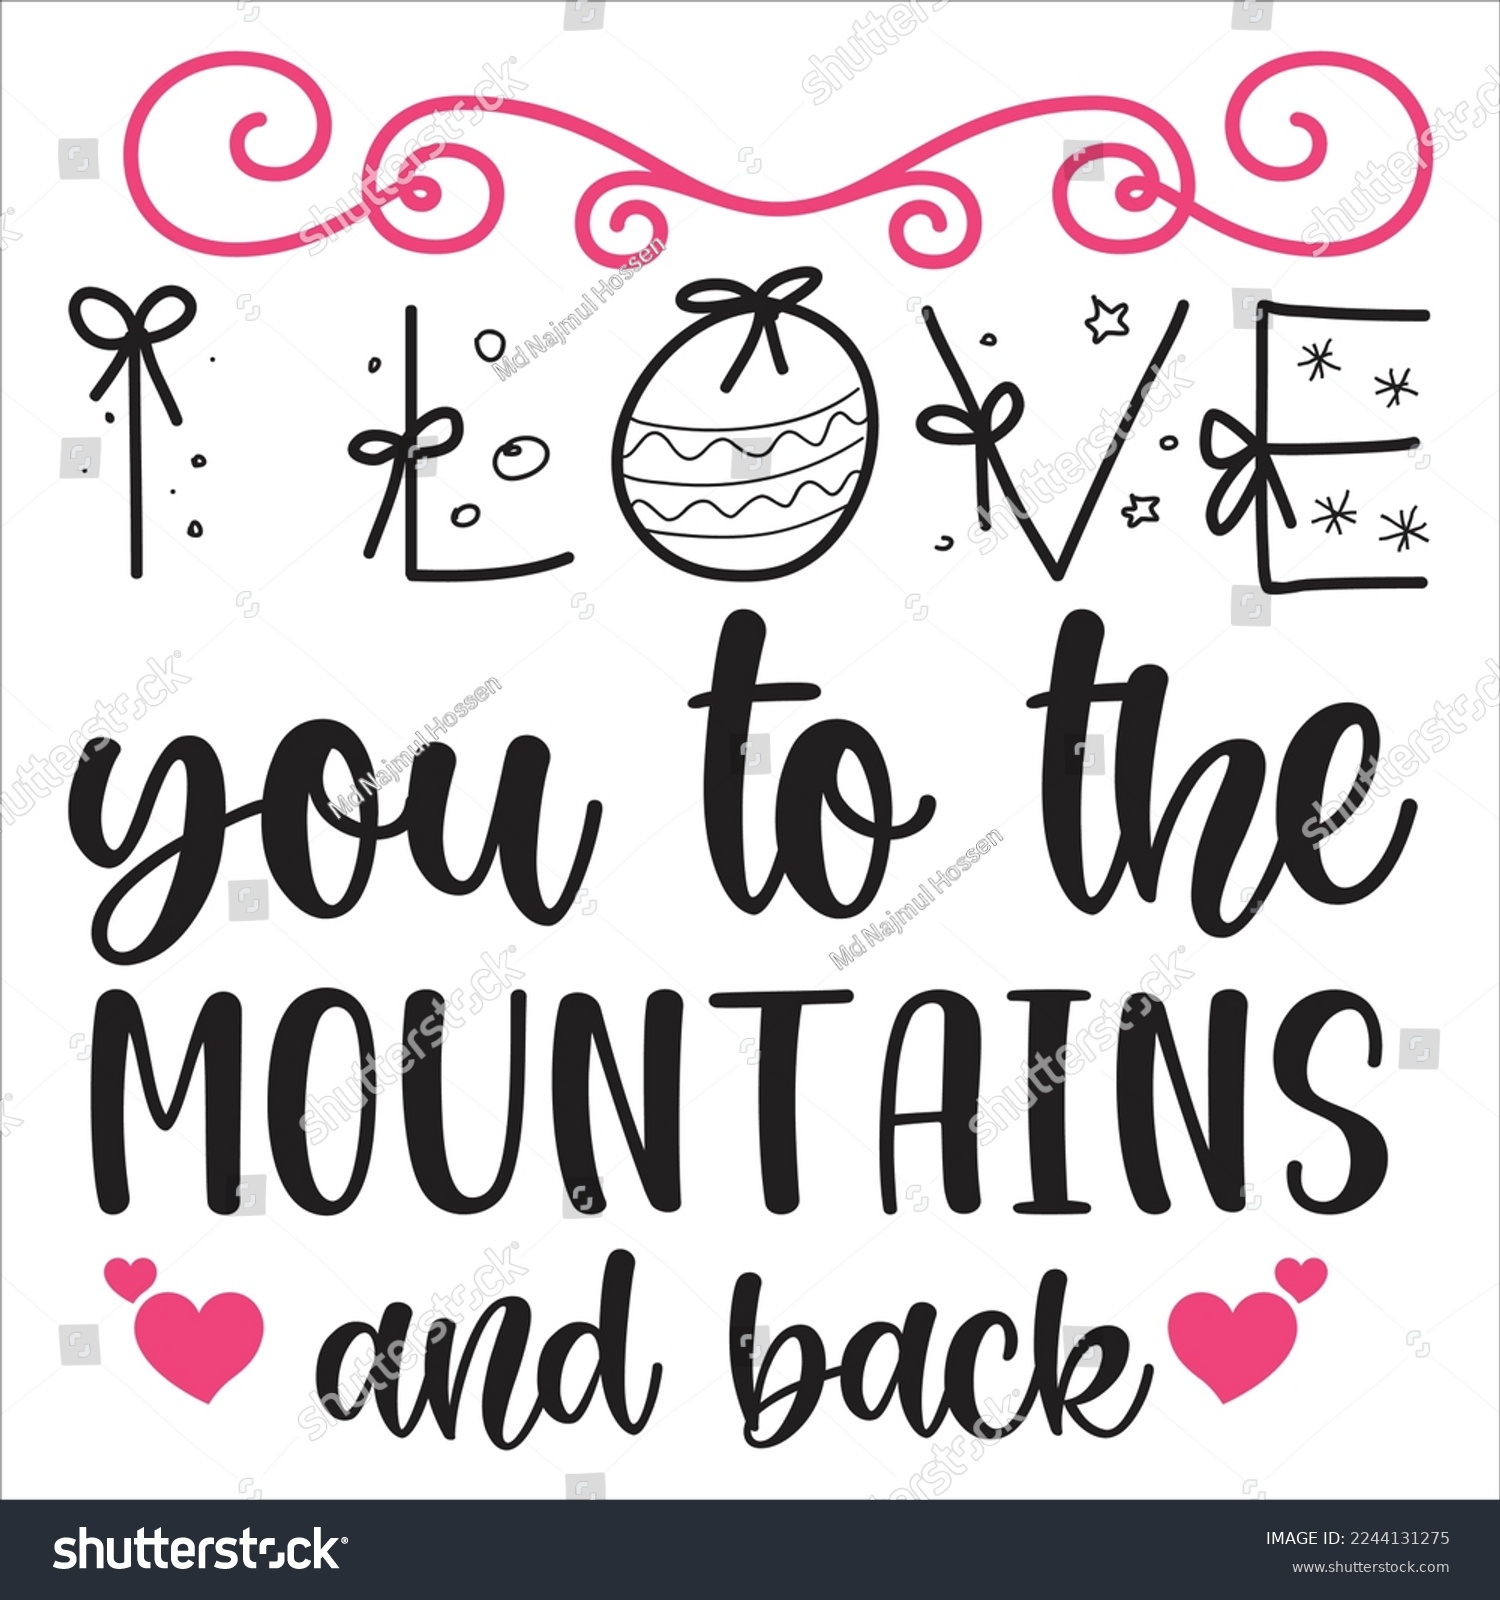 SVG of Love You To The Mountains, Happy valentine's day shirt Design Print Template Gift For Valentine's svg